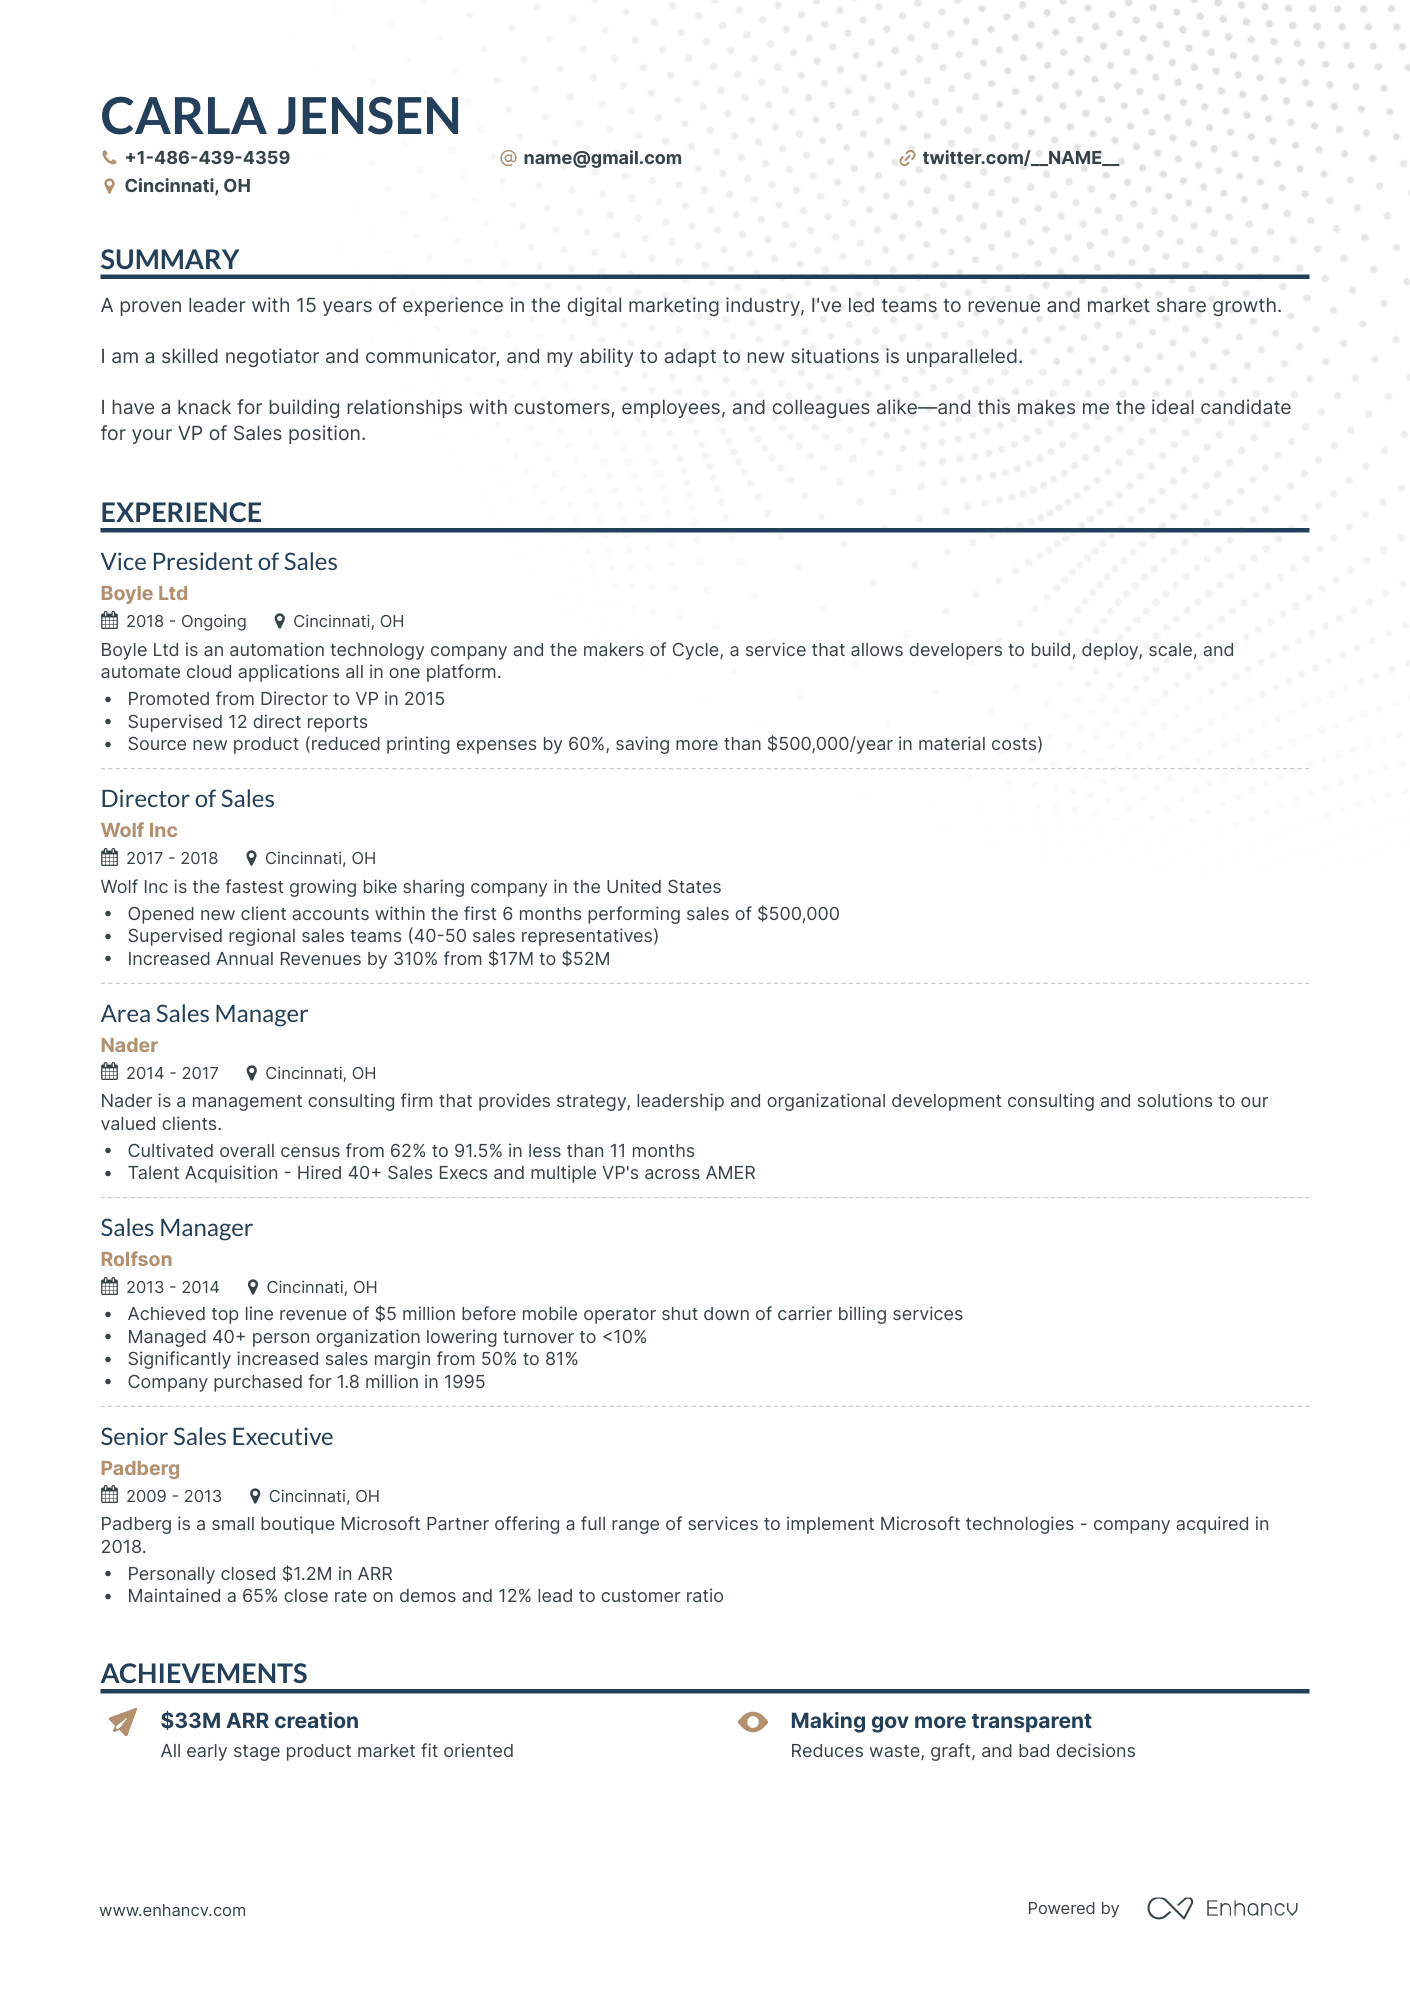 Classic VP of Sales Resume Template